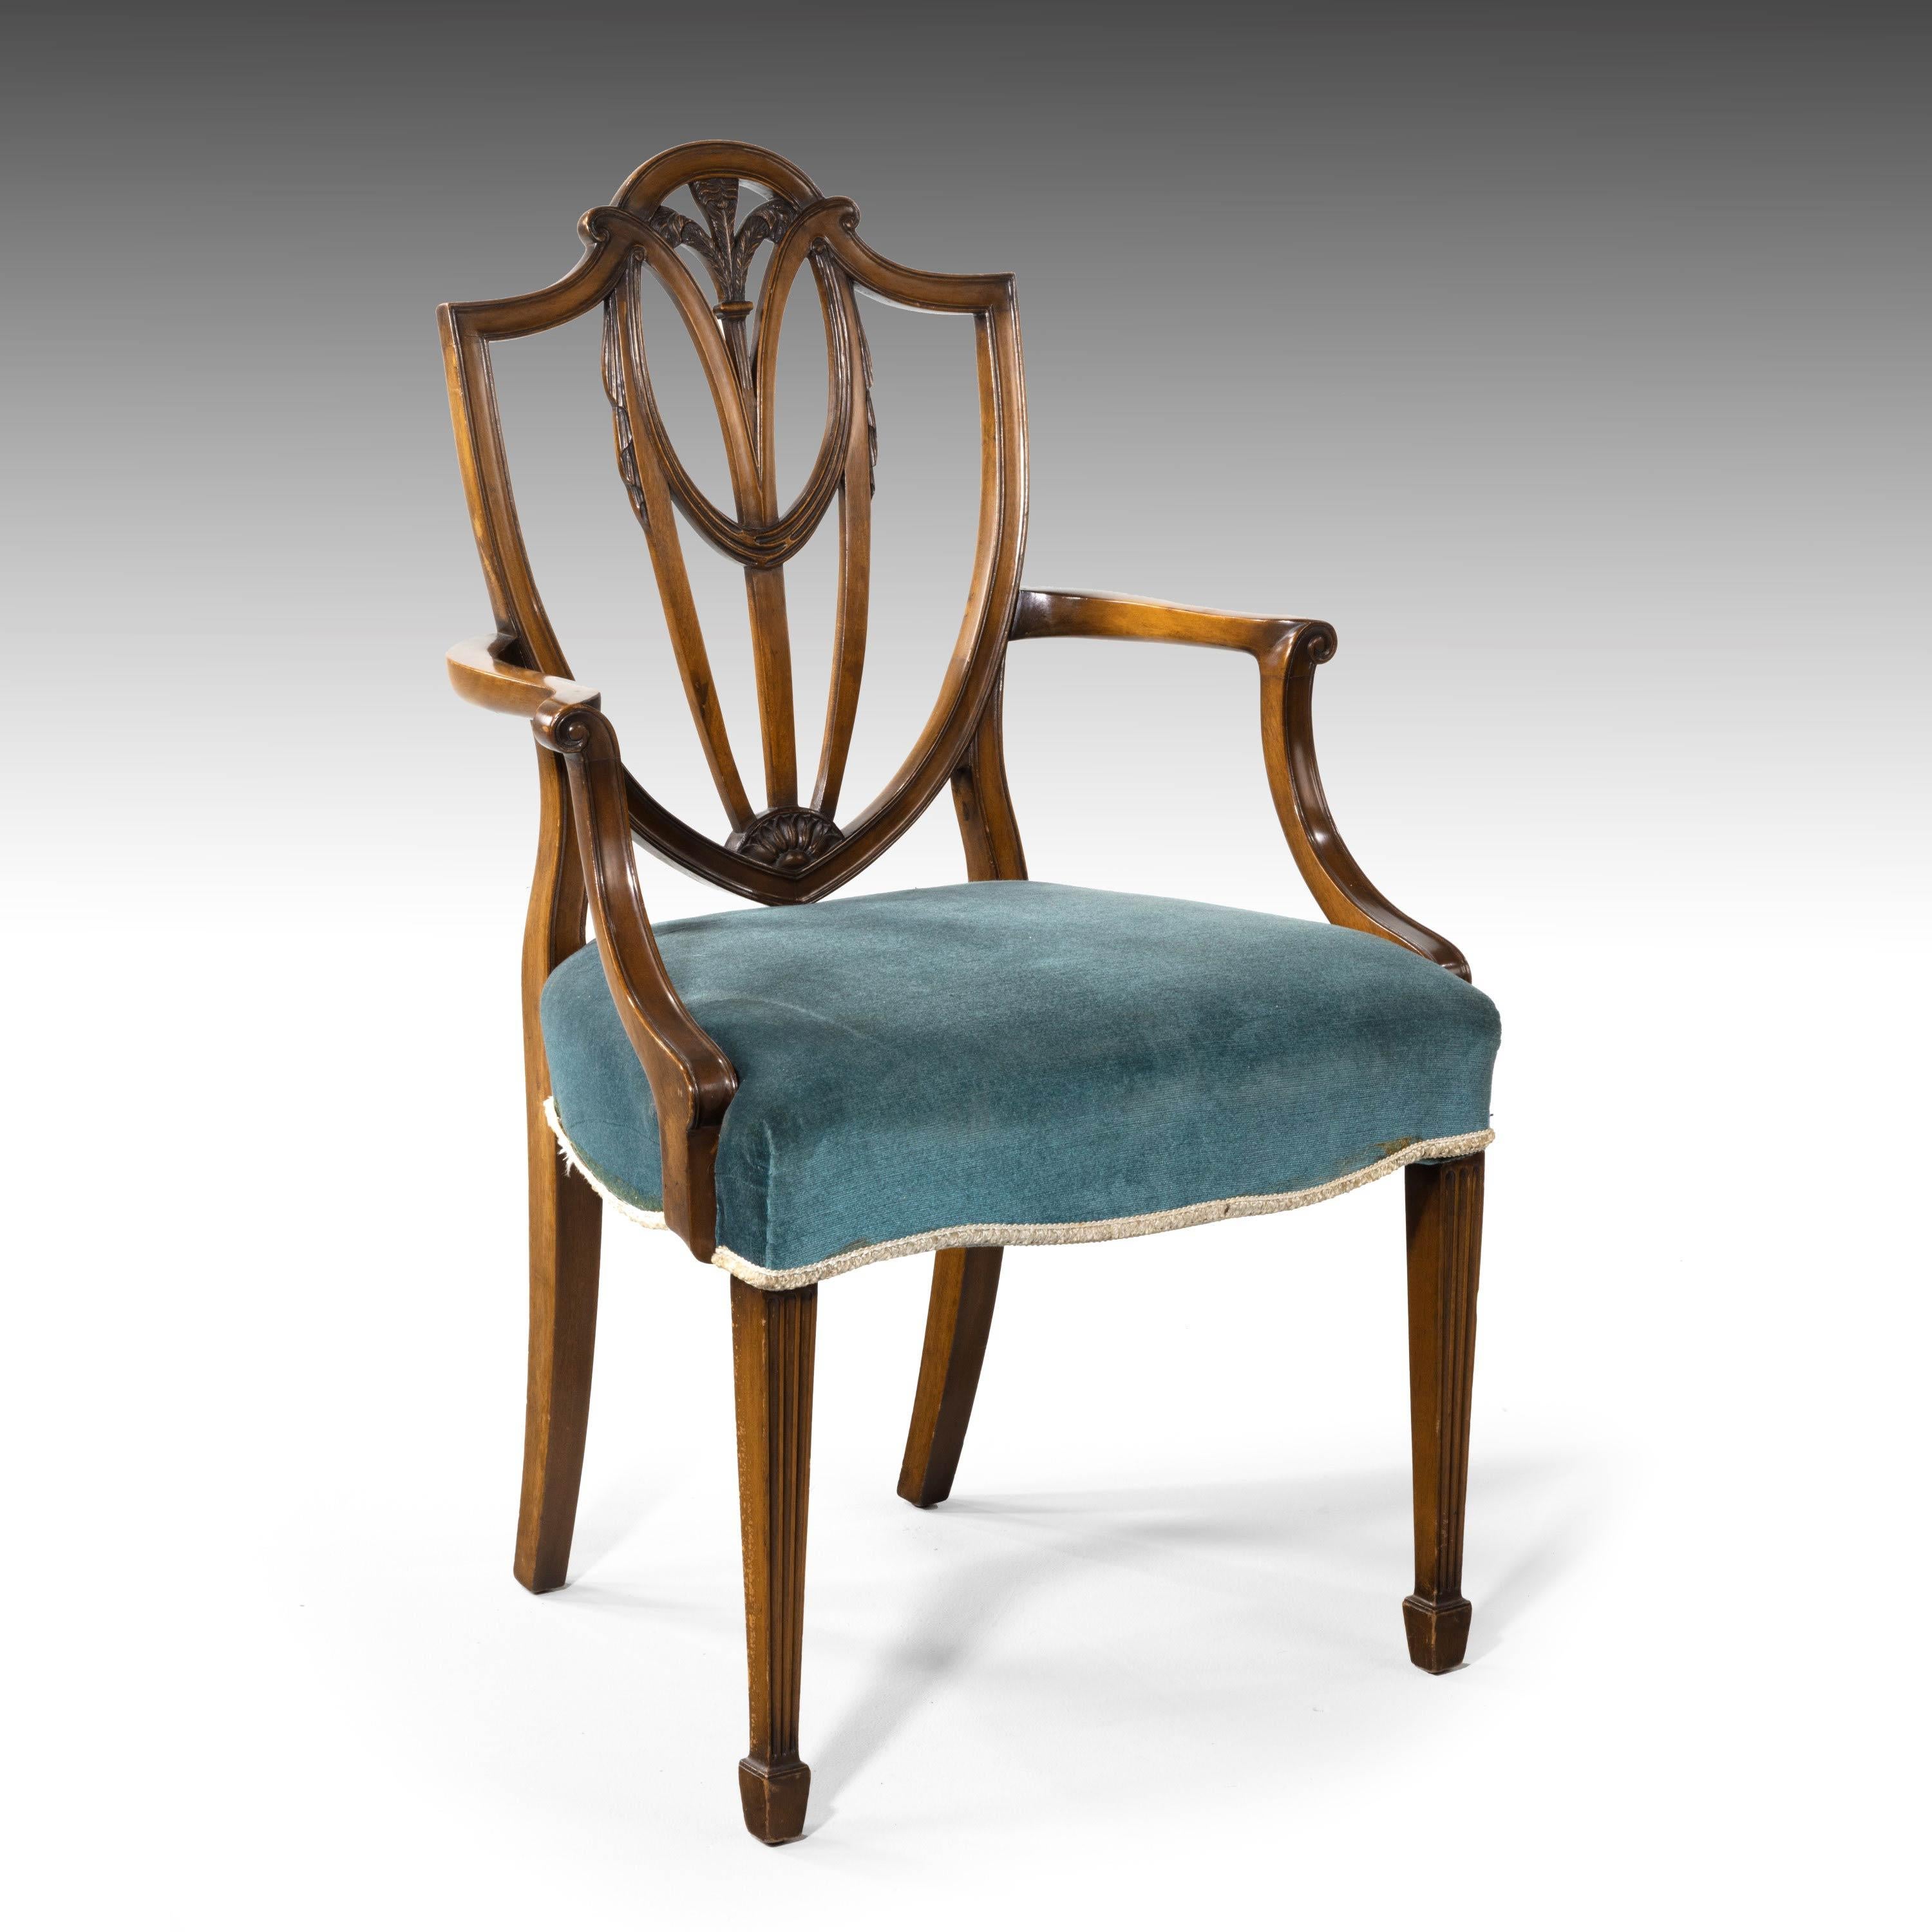 A most attractive set of 8 (6+2) Hepplewhite mahogany framed chairs of classical form. The high arched back with the finely carved plumes of the Prince of Wales feathers and drapes. Square tapering legs ending in block feet. With overstuffed horse